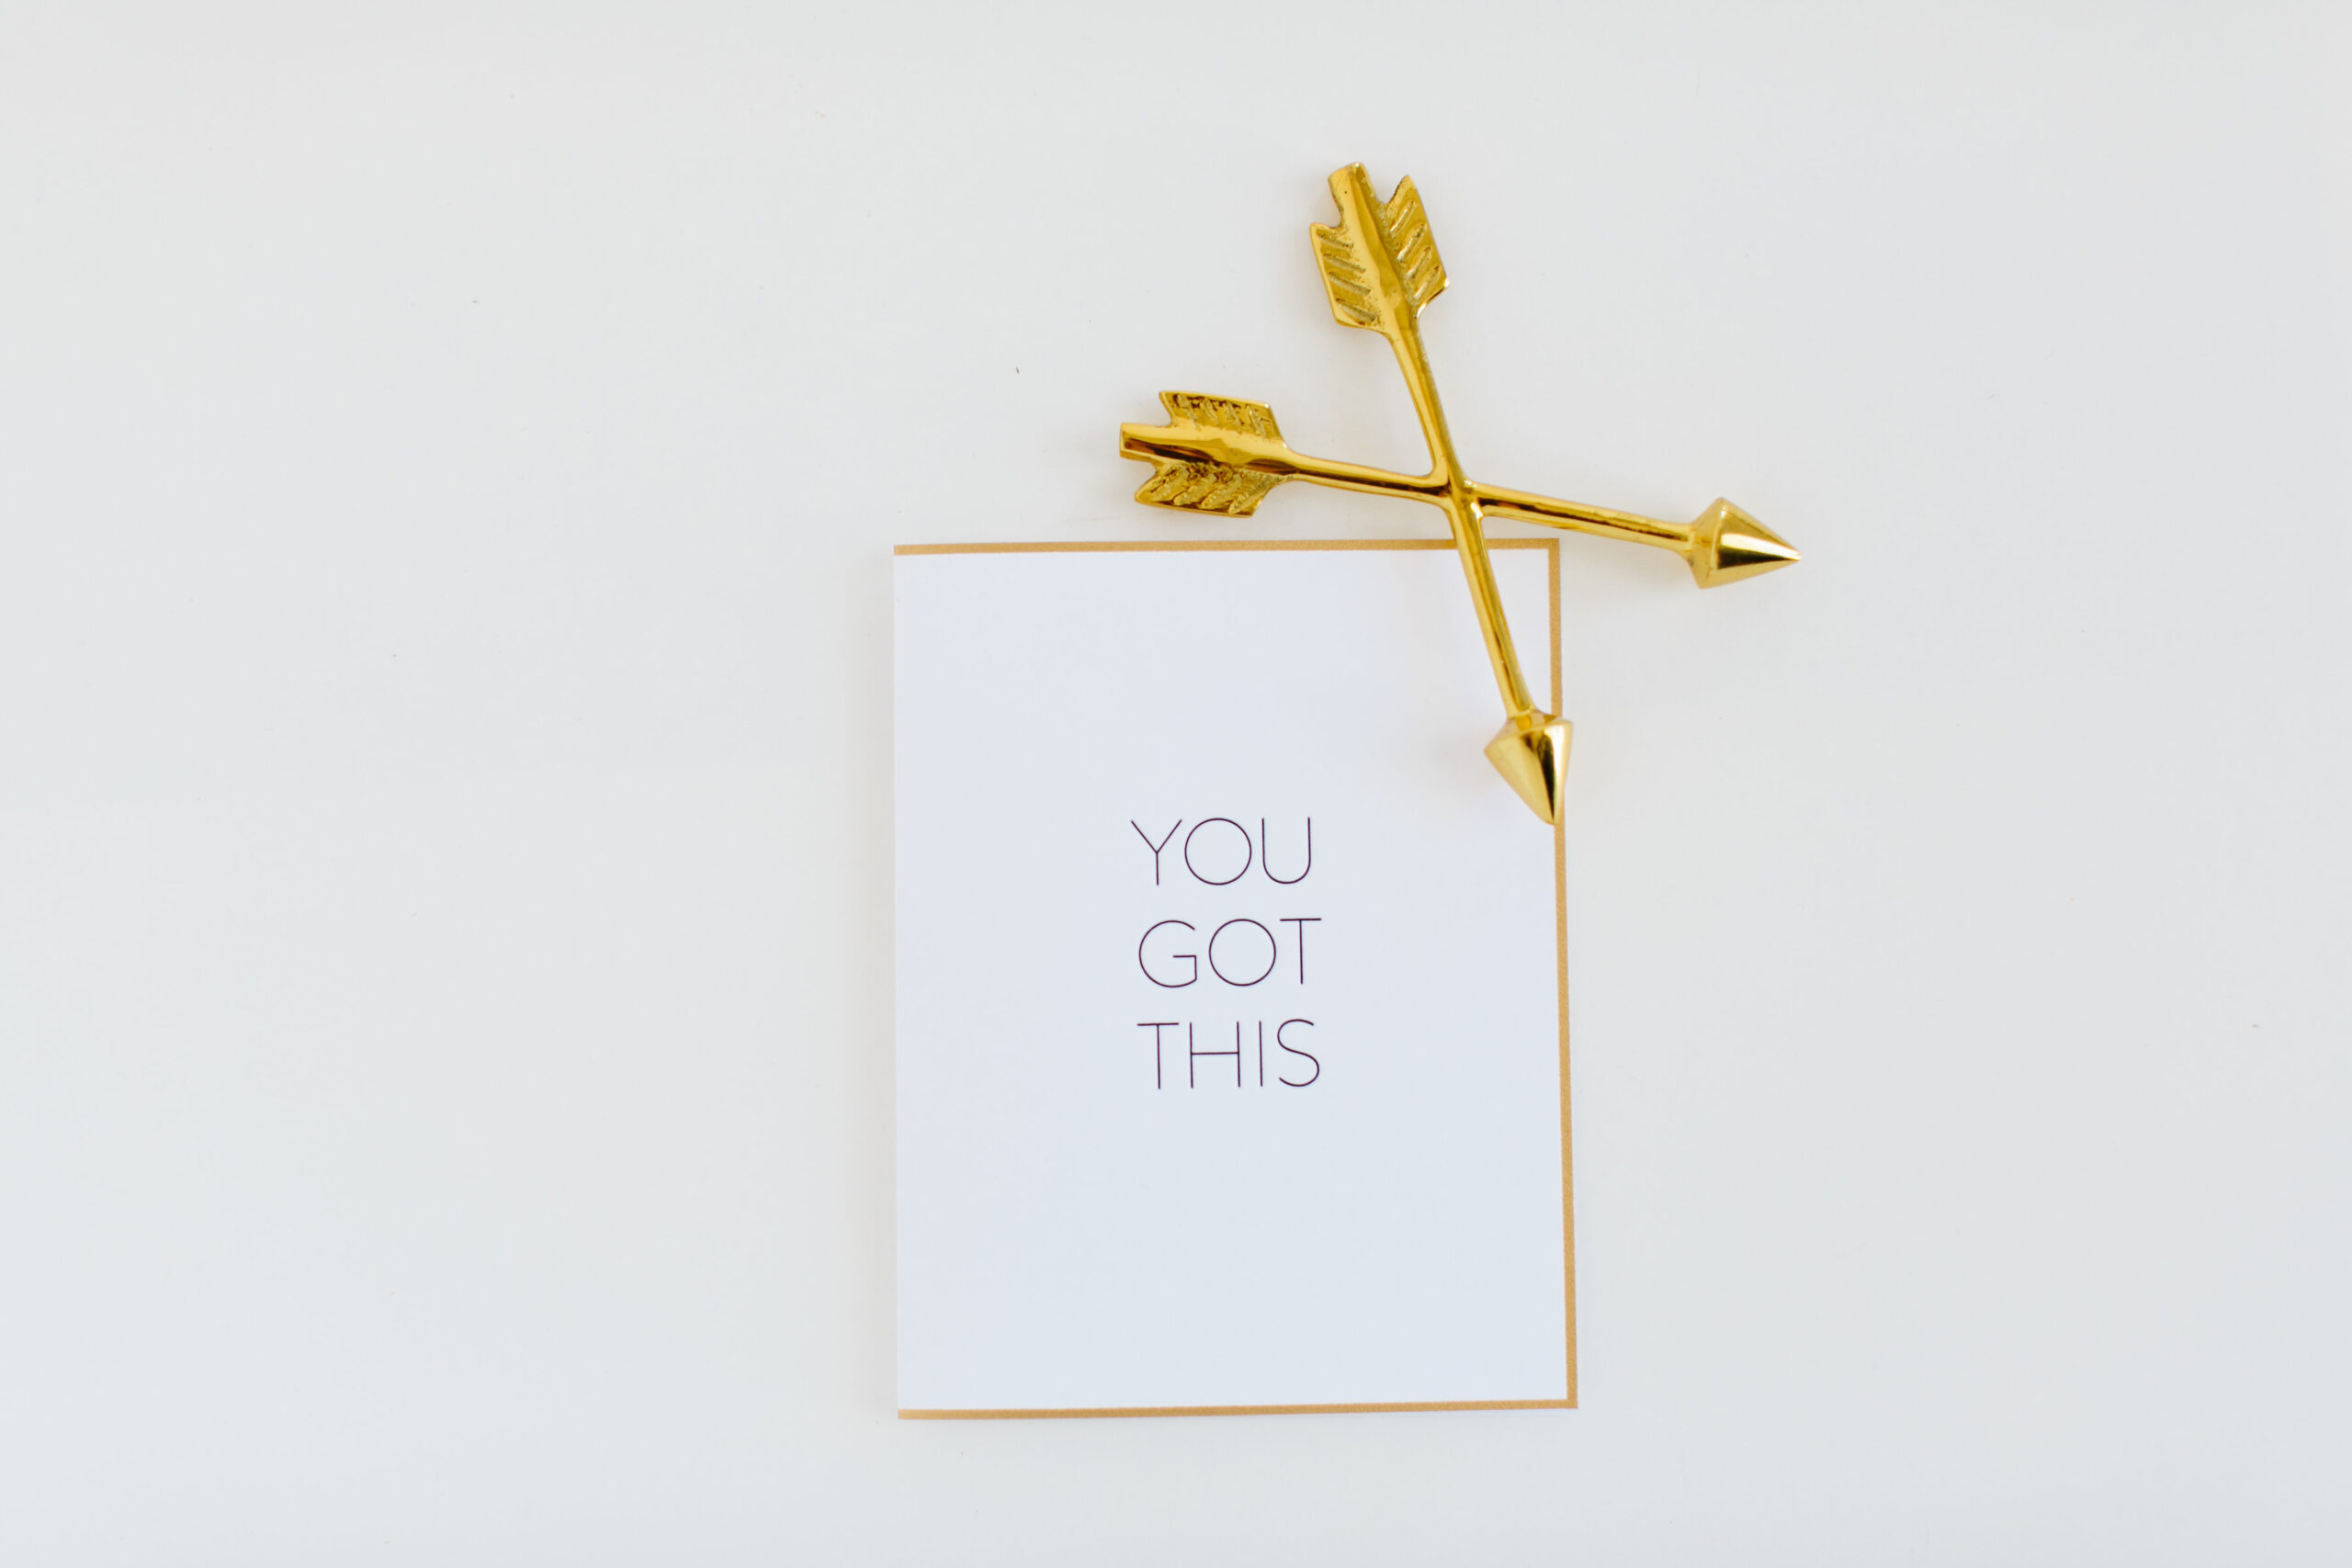 Gold framed sign that reads "You got this".